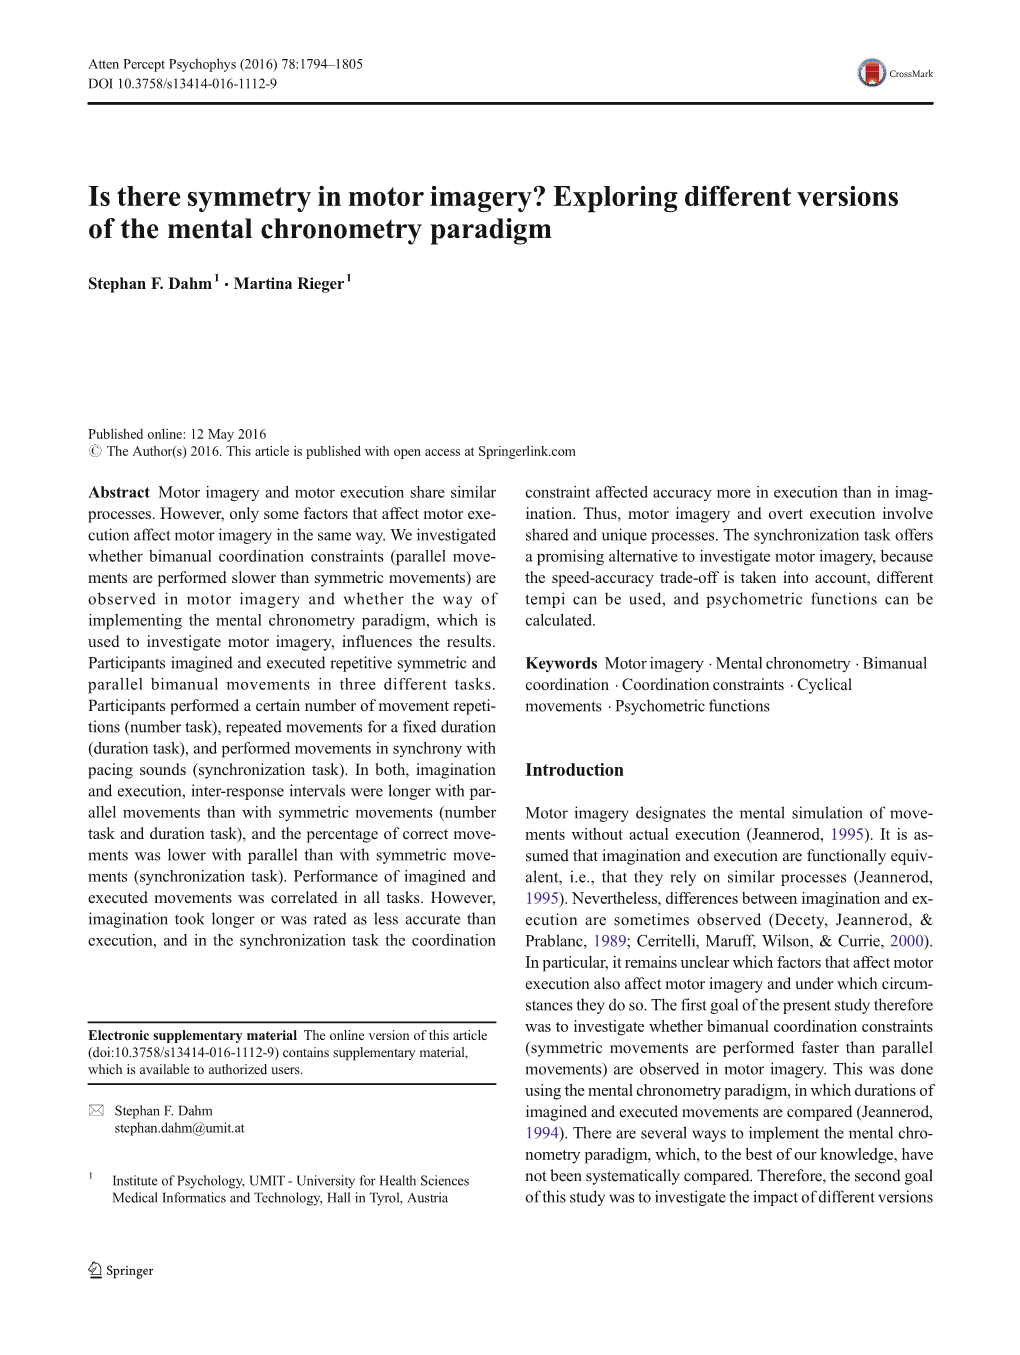 Is There Symmetry in Motor Imagery? Exploring Different Versions of the Mental Chronometry Paradigm